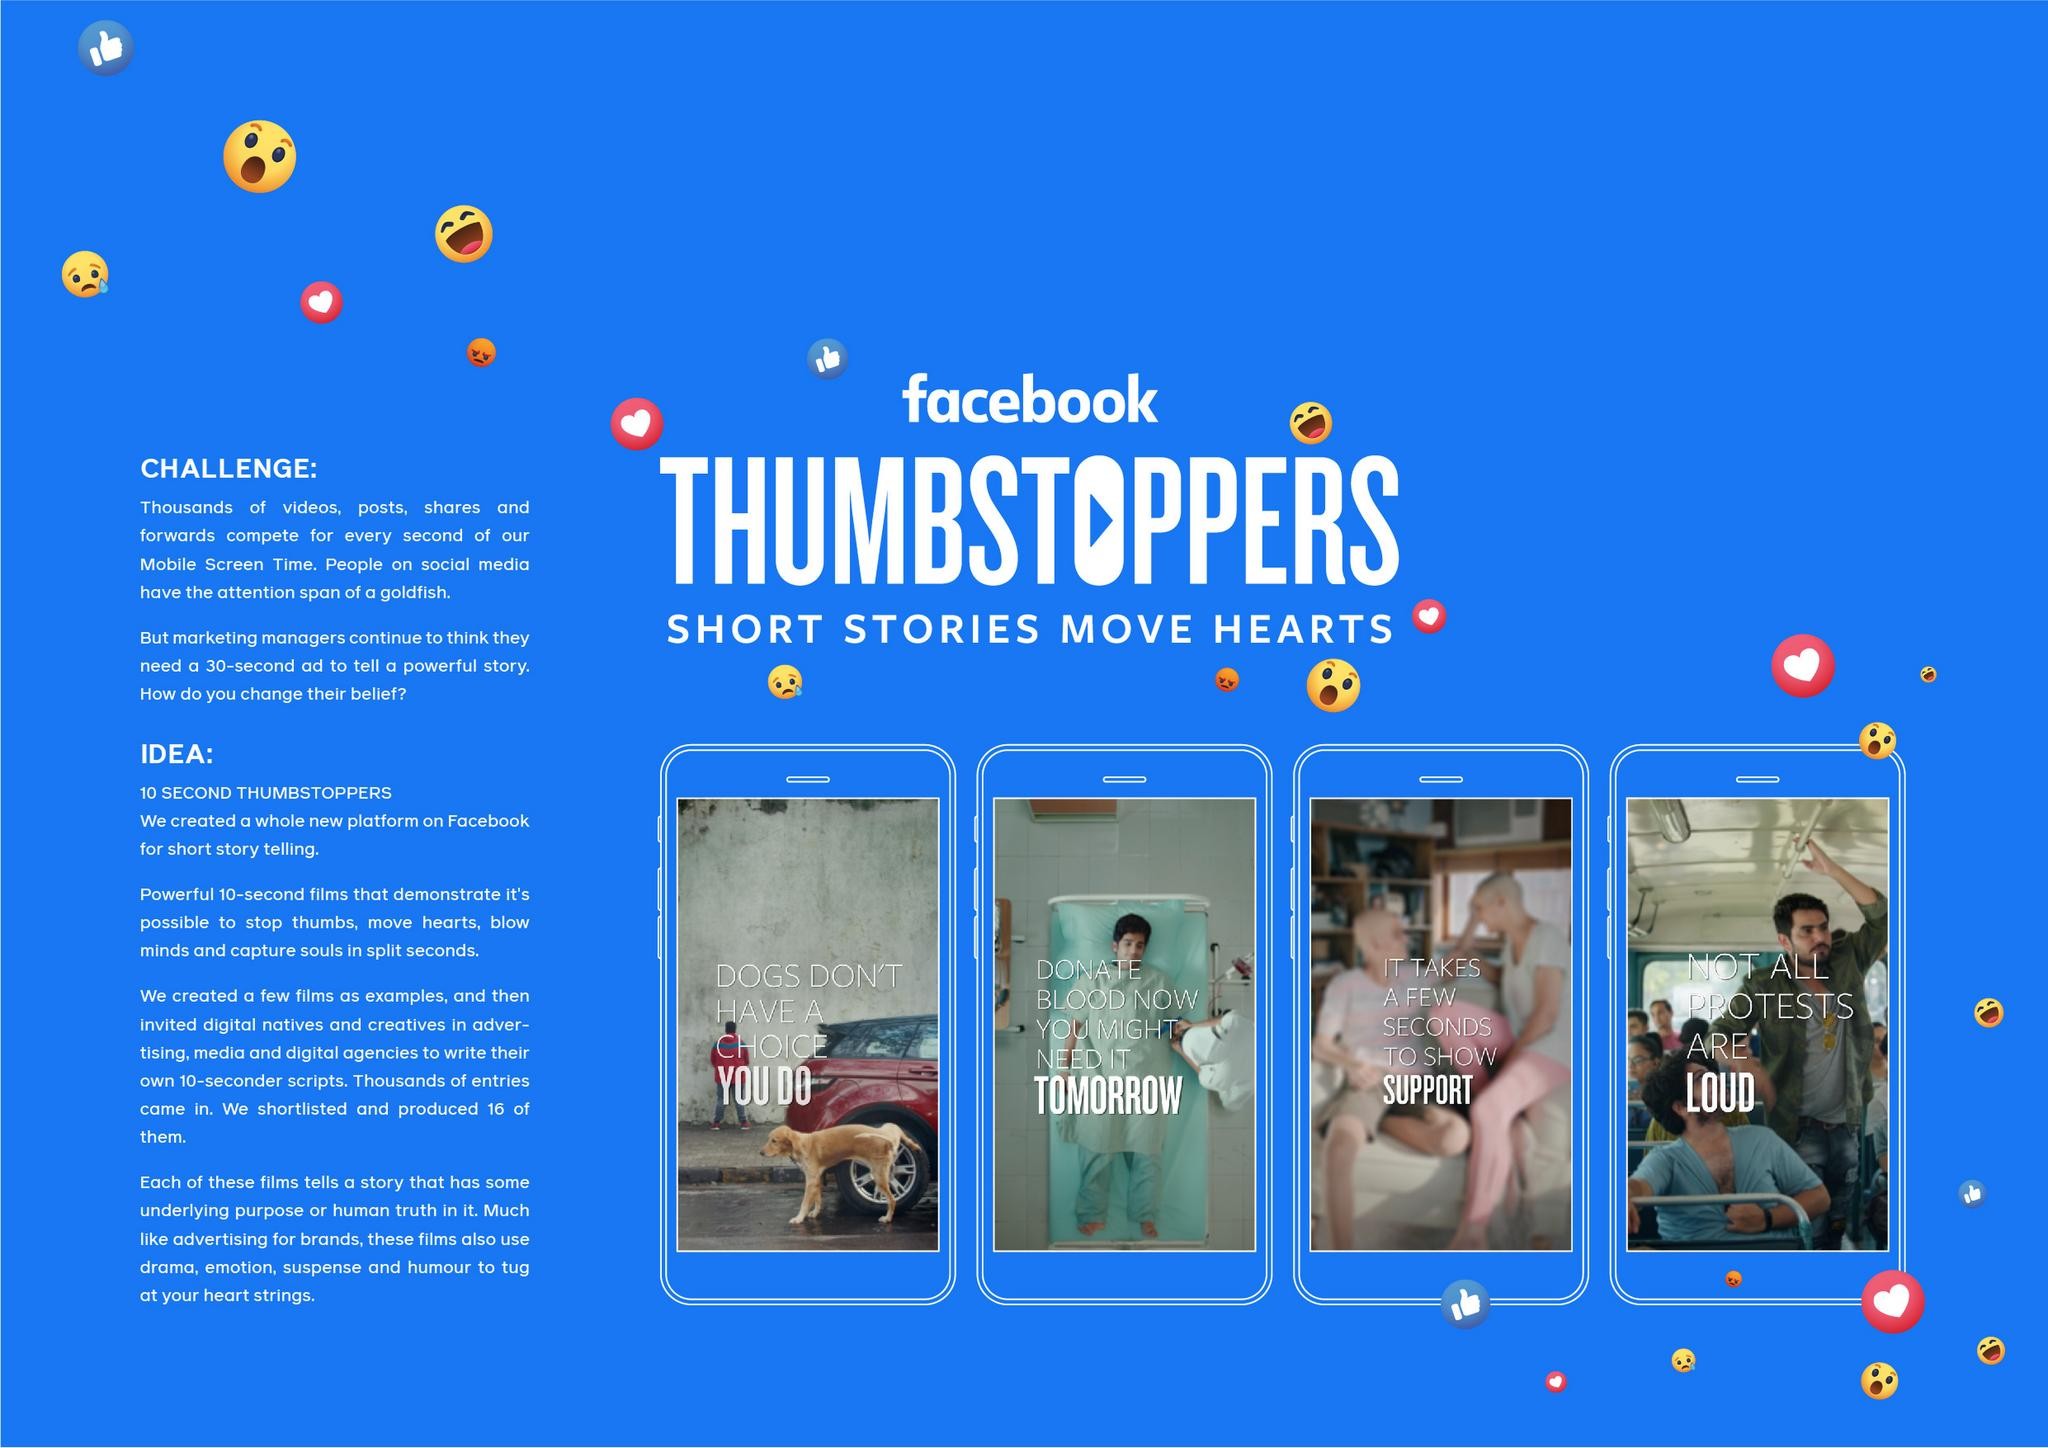 Thumbstoppers